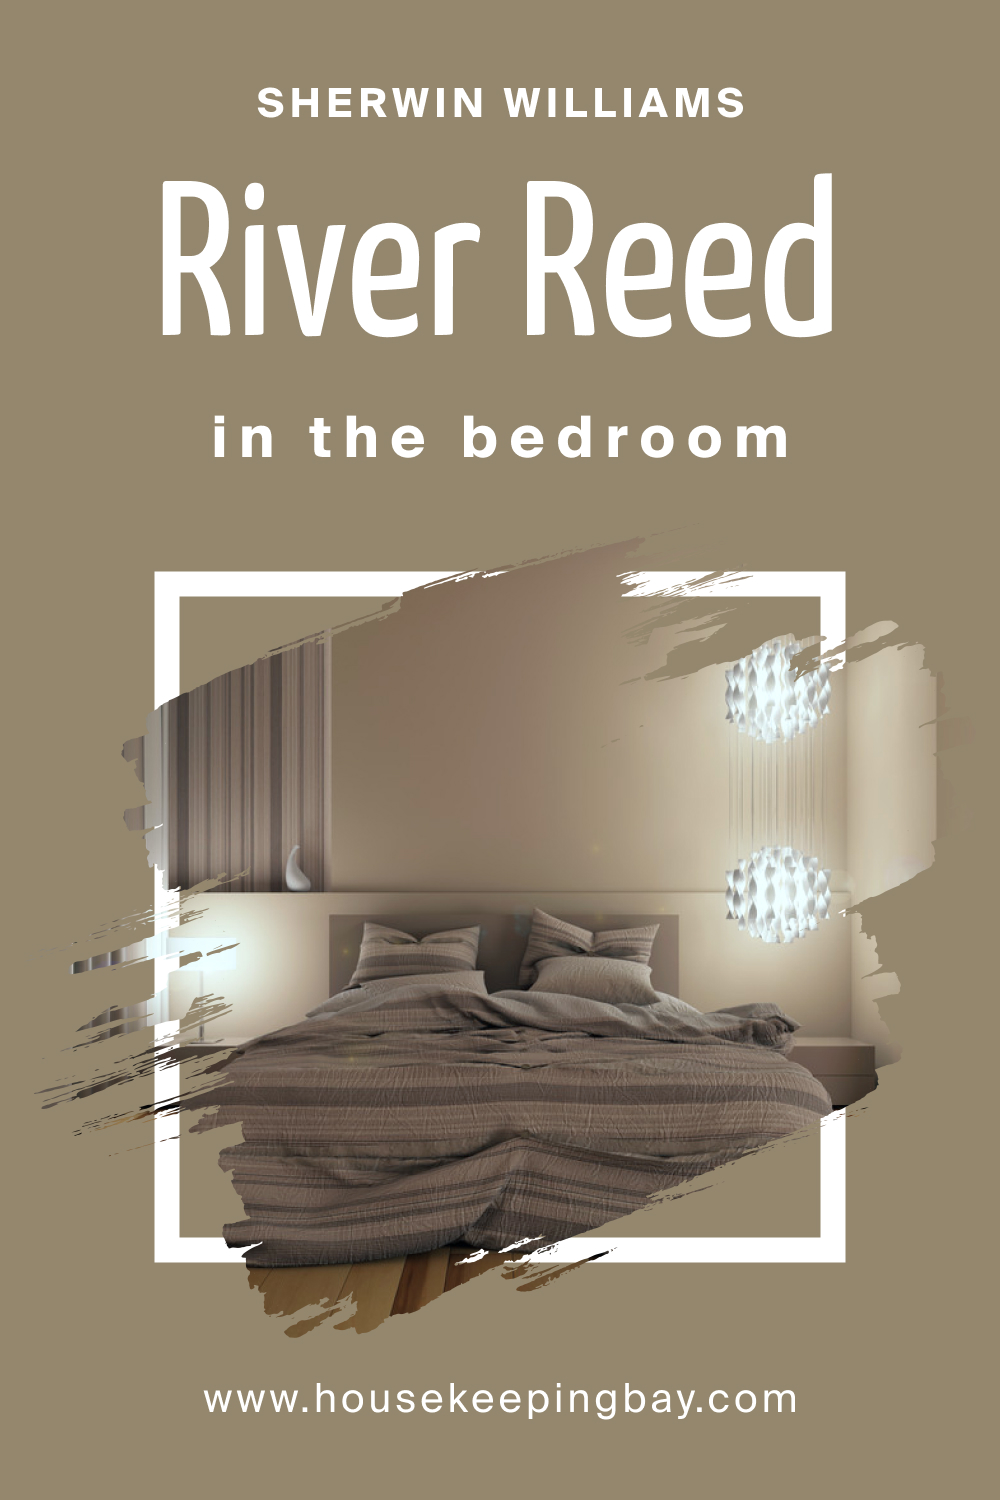 Sherwin Williams. SW 9534 River Reed For the bedroom